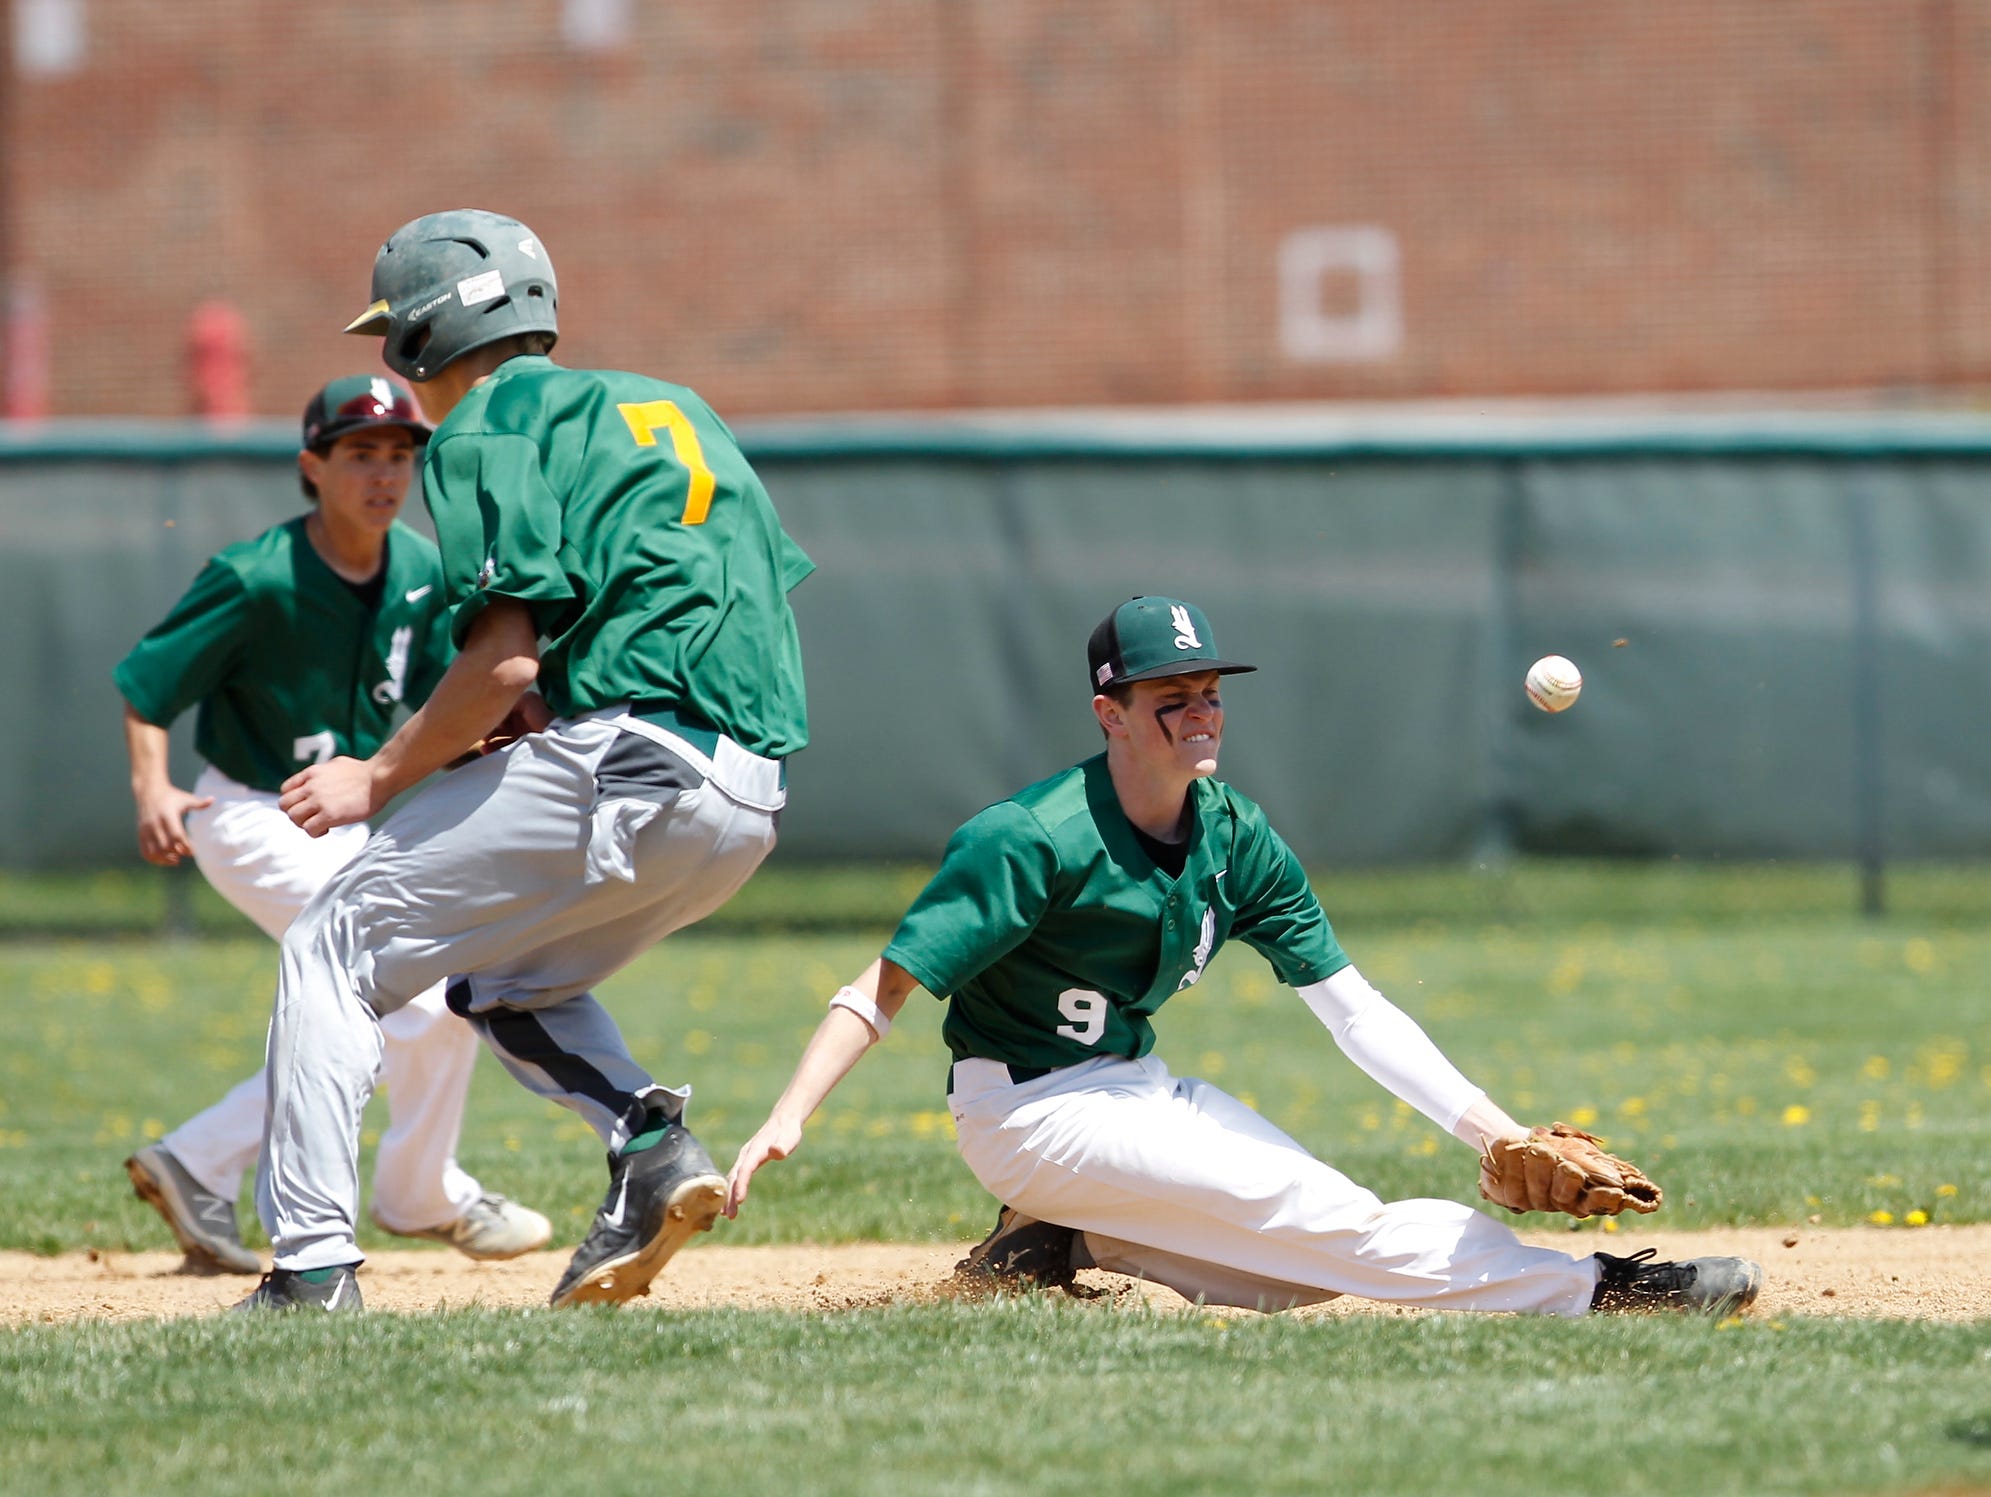 Lakeland's Trevor McCarthy (7) is safe at second as Yorktown second baseman Trevor Boclan (9) reaches for the throw during a varsity baseball game in Yorktown High School on Saturday, April 23, 2016.